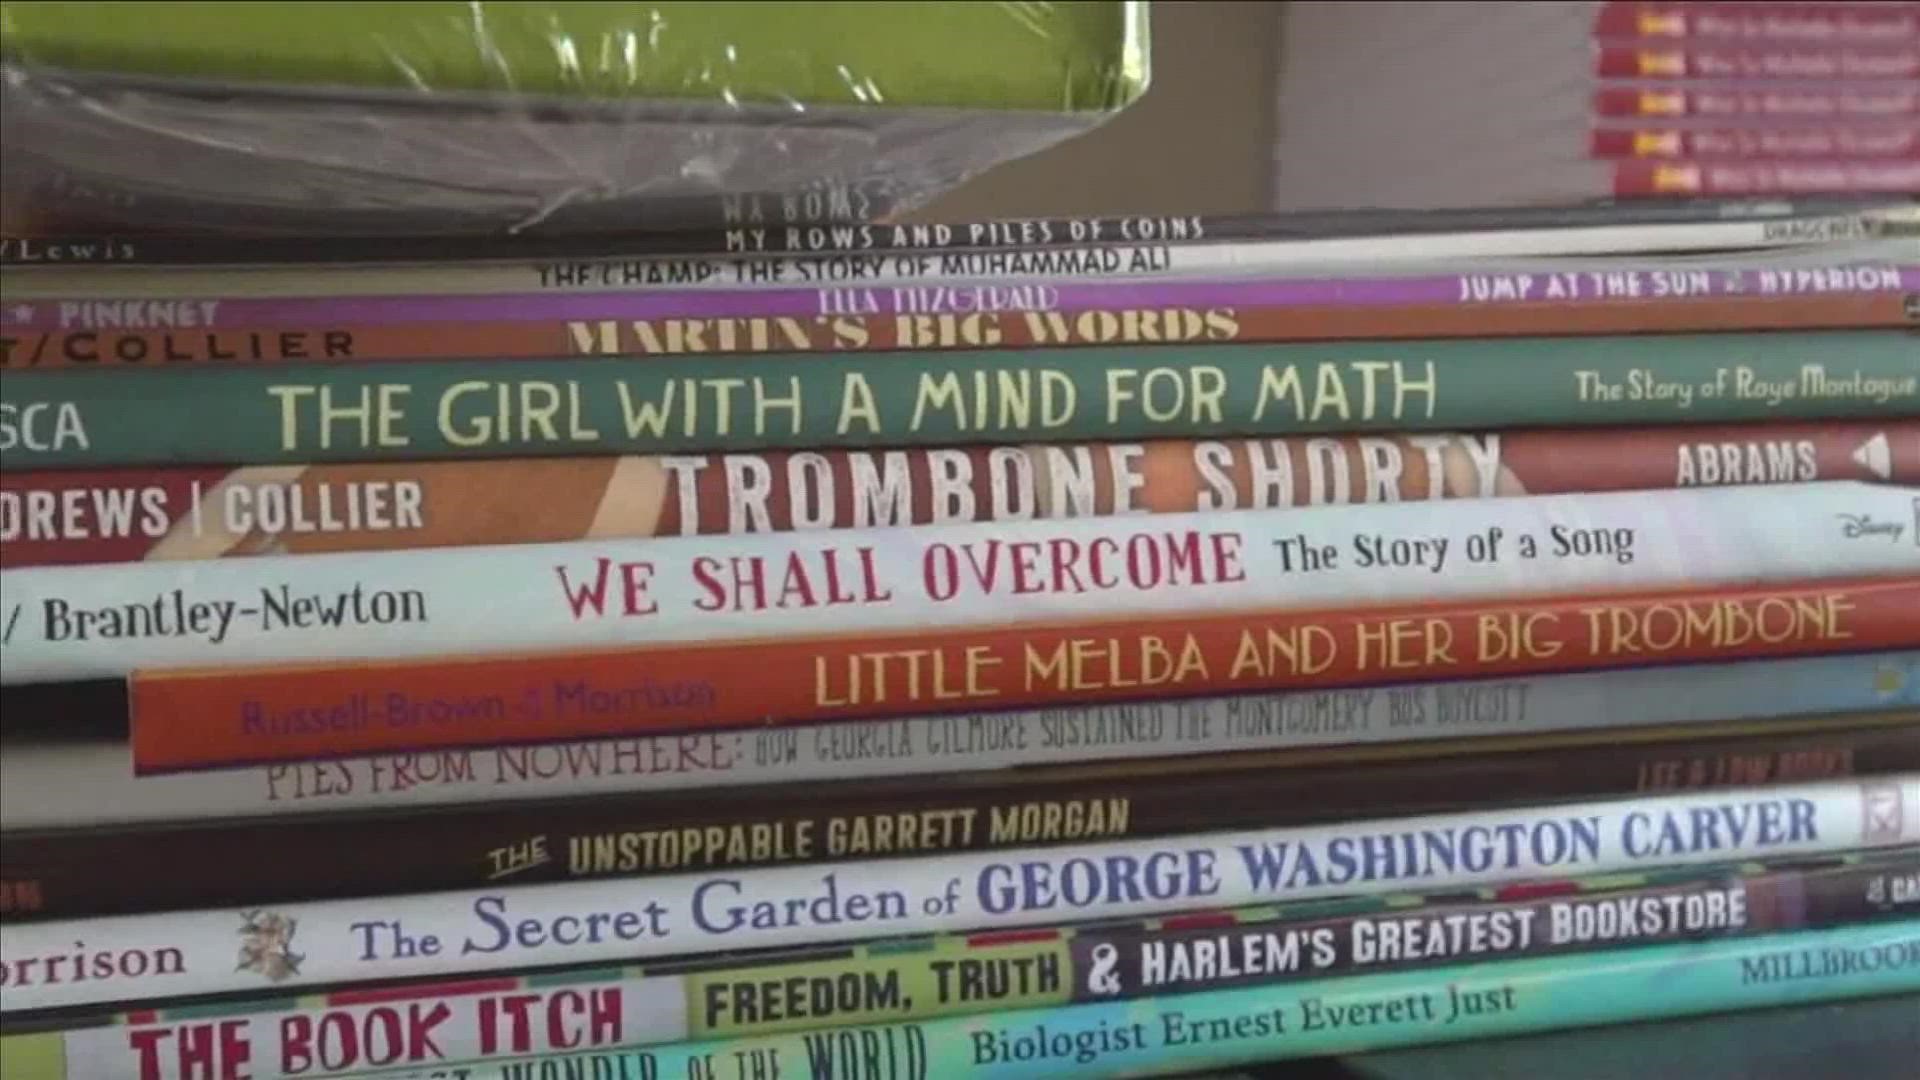 After hitting a record low number of volunteers, Literacy Mid-South spoke about how their work is aiming to break generational cycles, and the help they need.